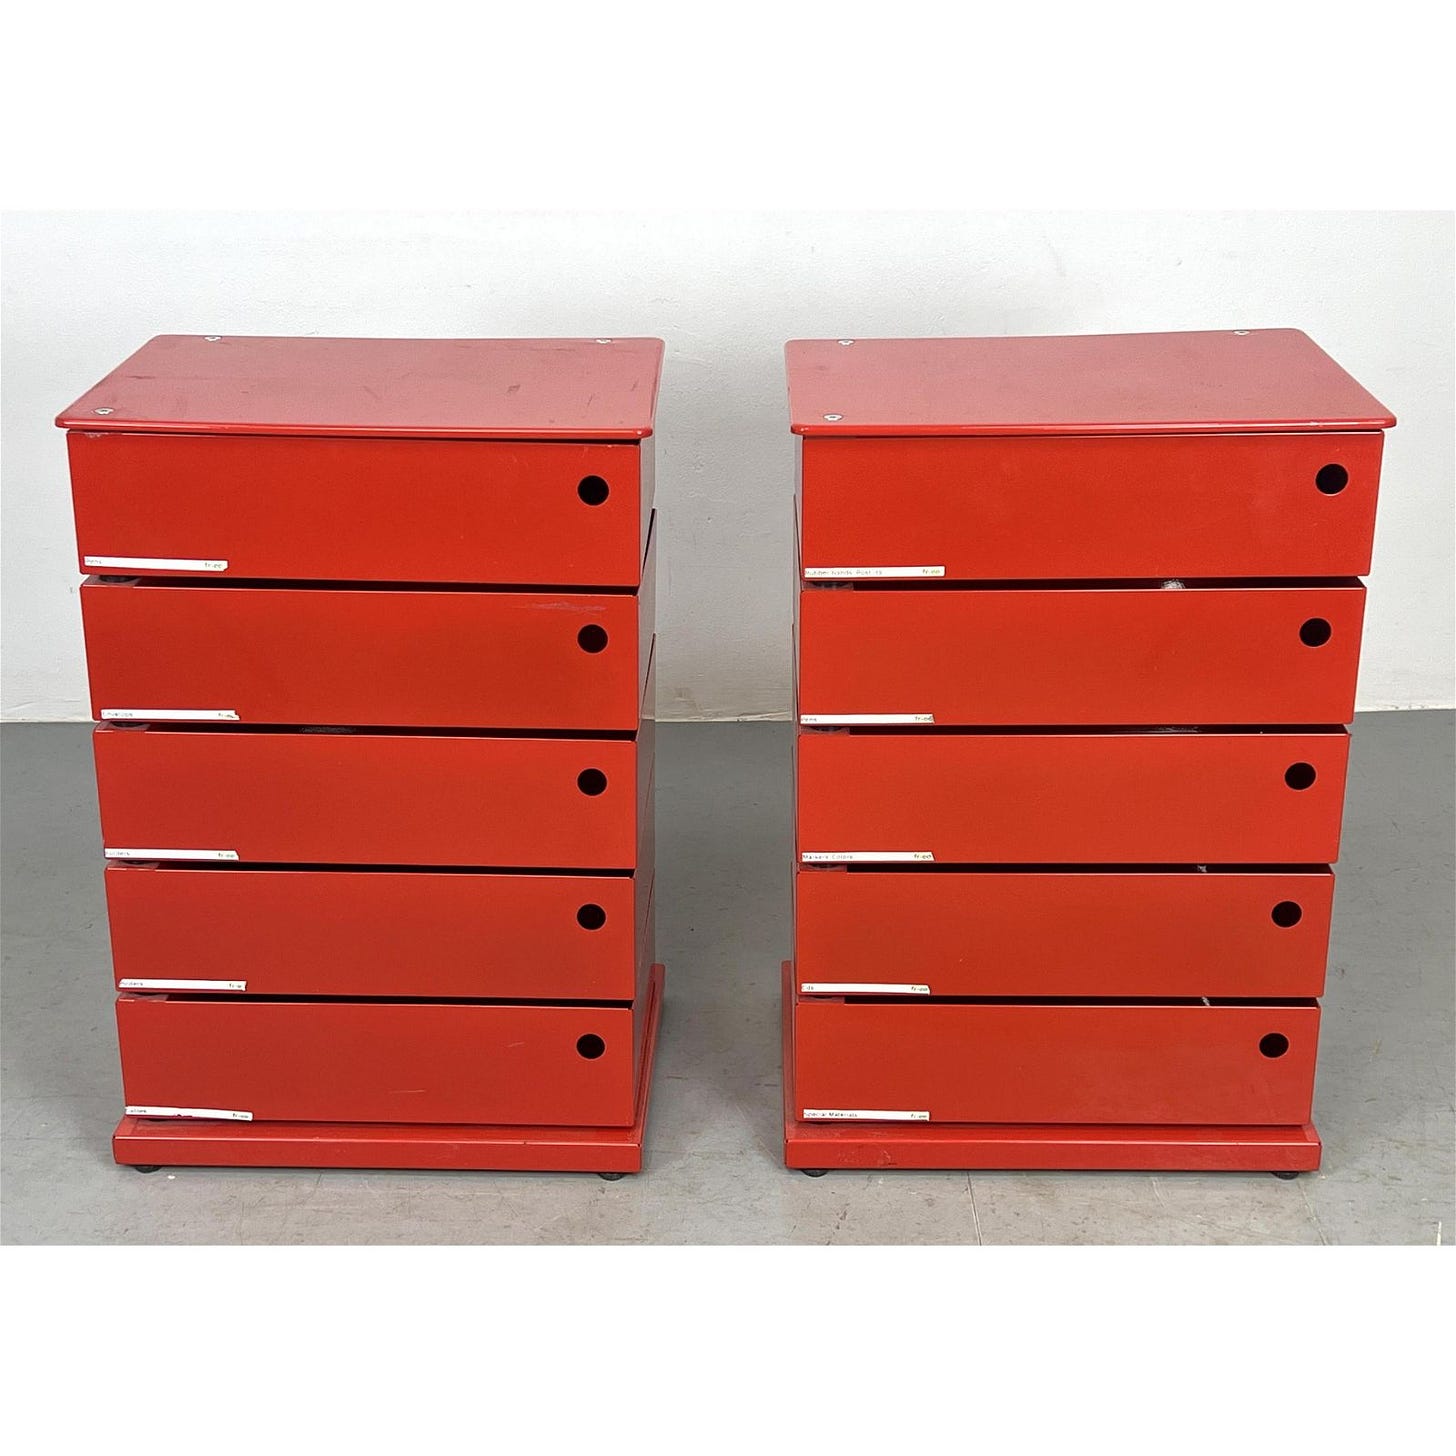 Pr Bright Red Enameled Drawer Tower Cabinets. Drawers swing out on Pivot. Good storage for artists,